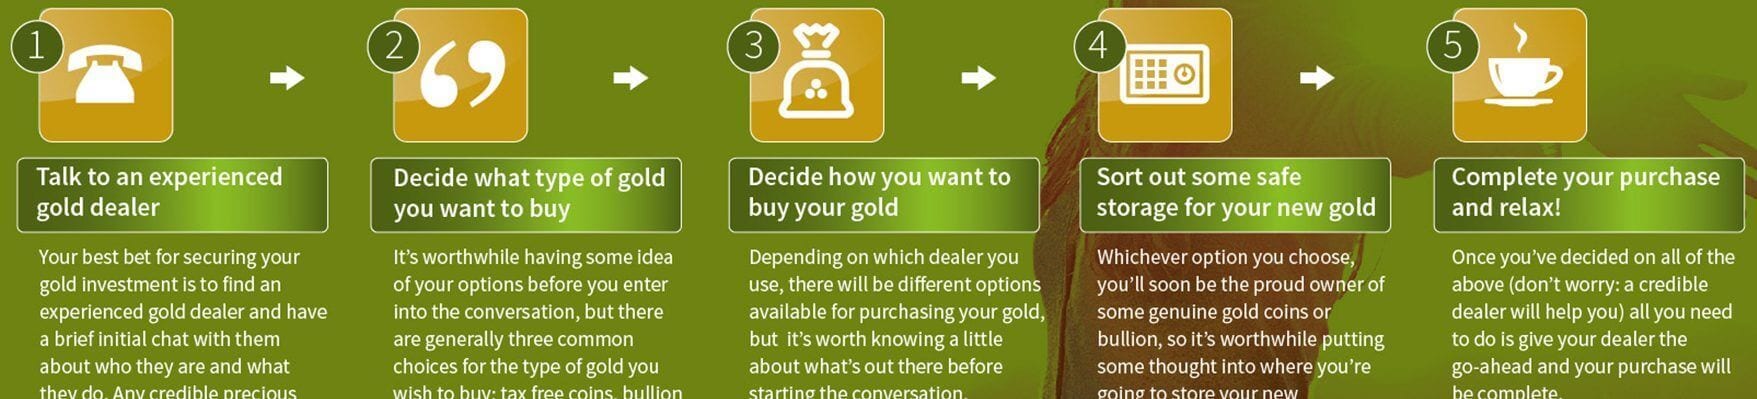 5 steps to gold investment